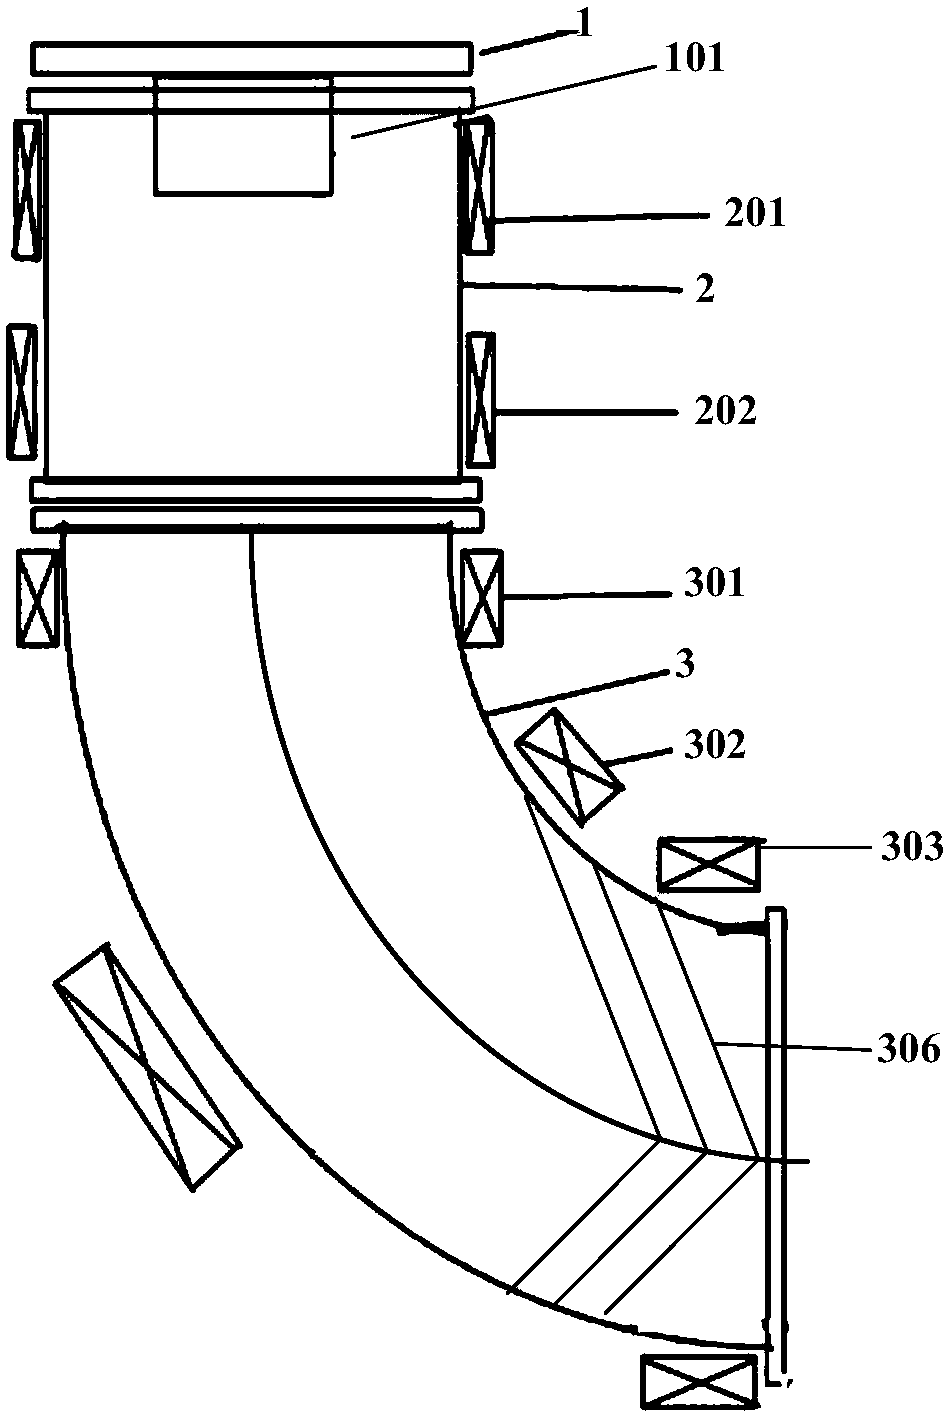 Cathode vacuum arc plasma magnetic filter device and application thereof